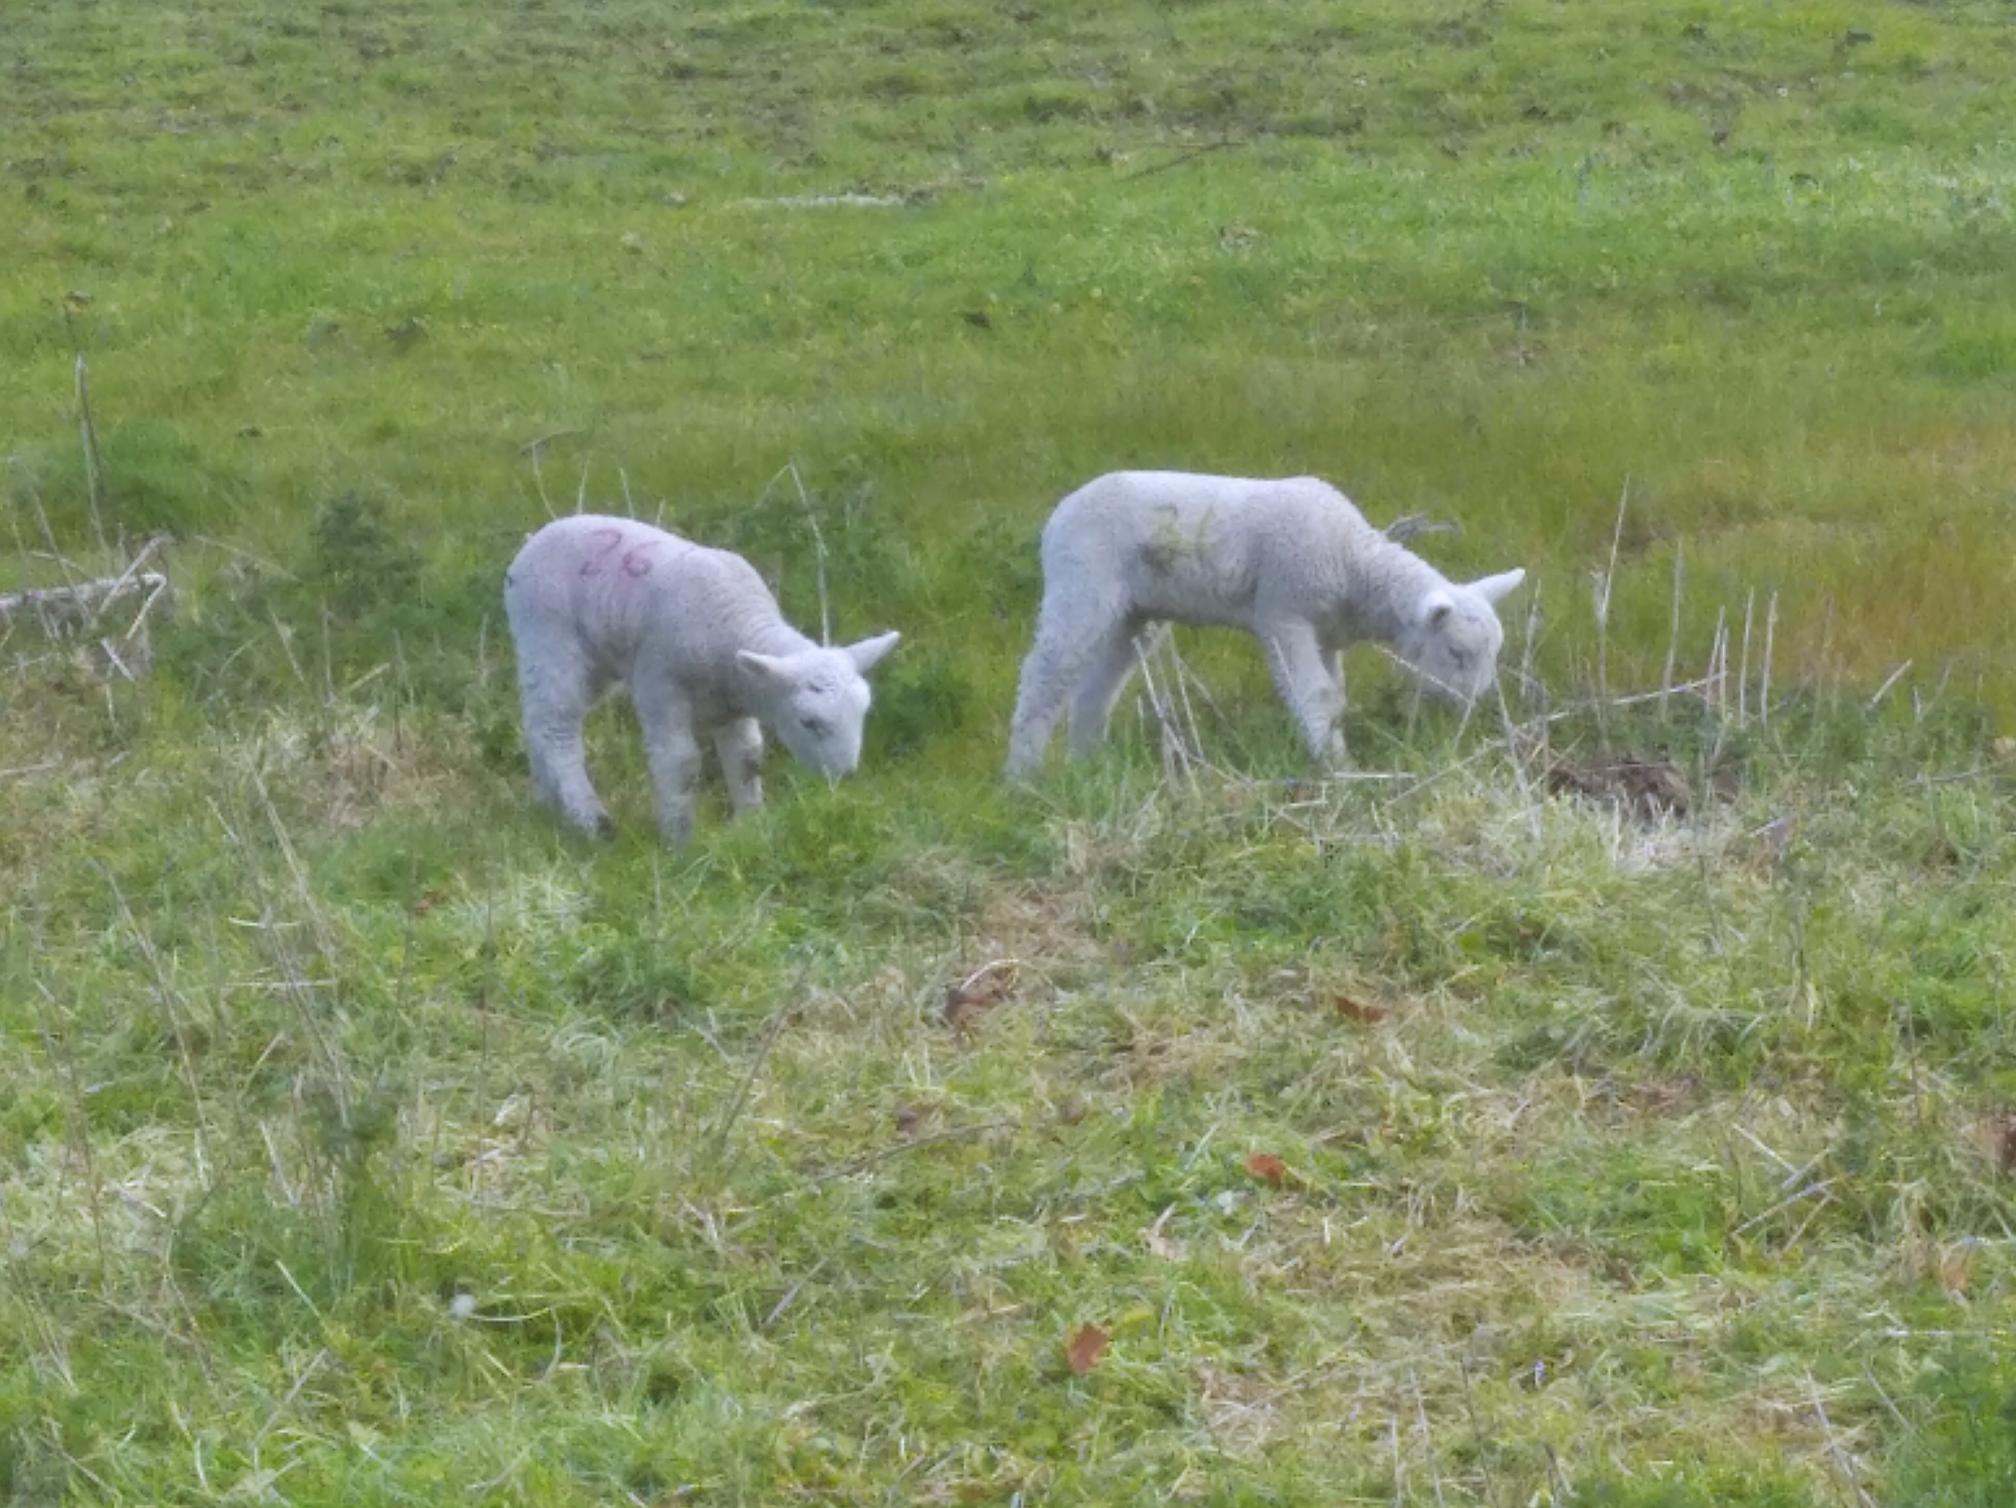 Two lambs feeding on some grass in a field. The lamb on the left has on it the number '26' in purple marker pen and the sheep on the right has on it the number '36' in green marker.